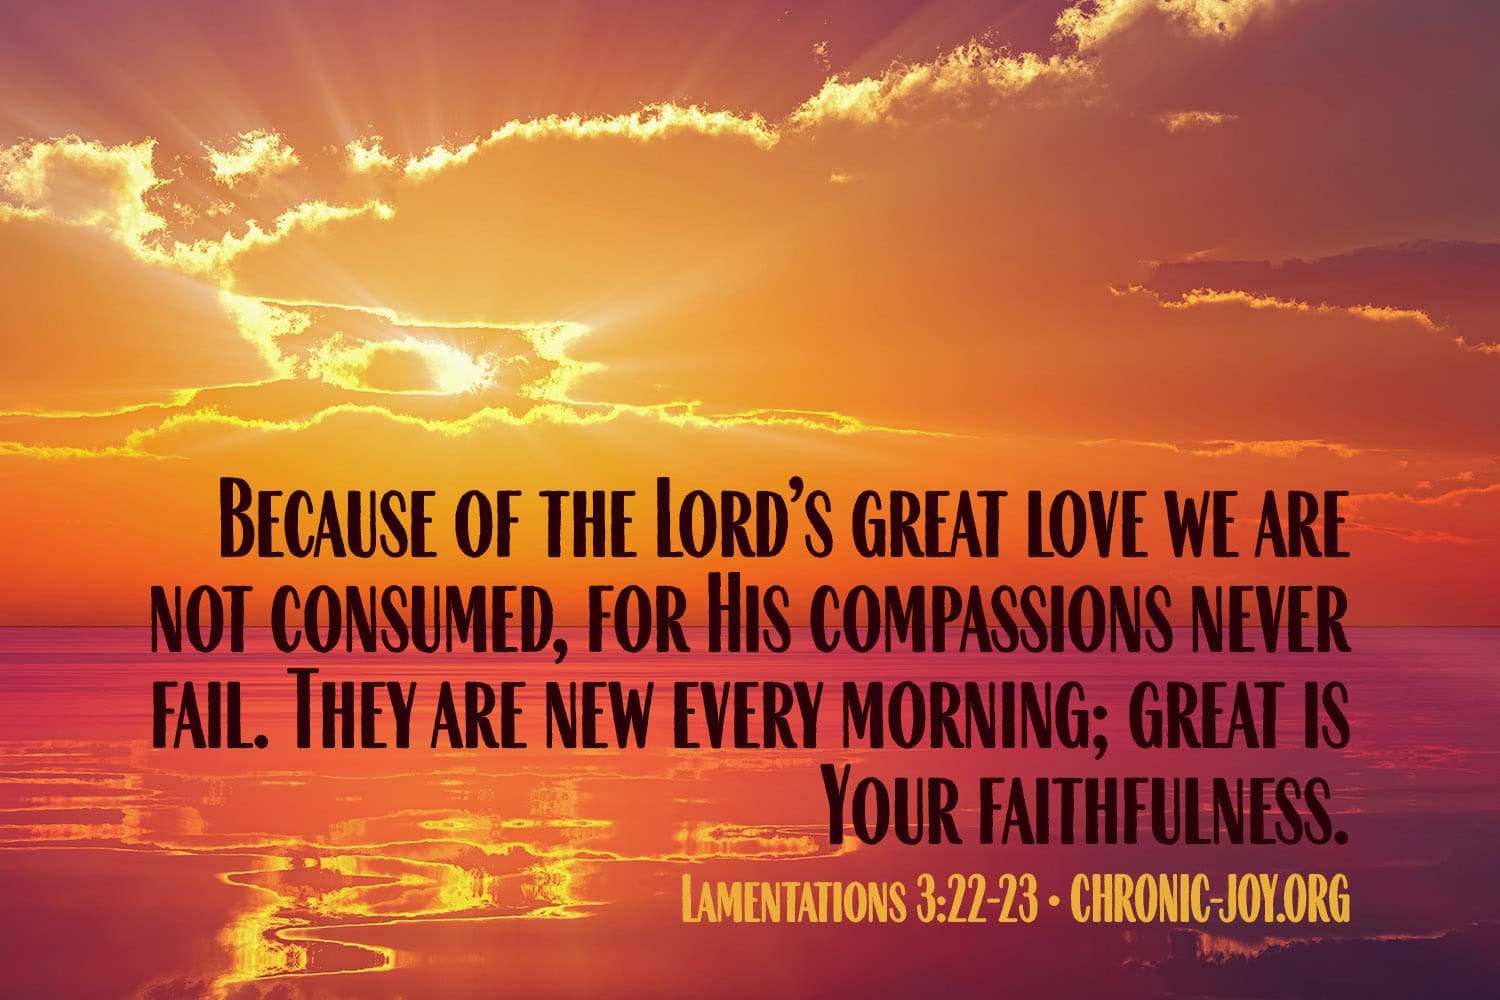 "Because of the Lord’s great love we are not consumed, for His compassions never fail. They are new every morning; great is Your faithfulness." (Lamentations 3:22-23)